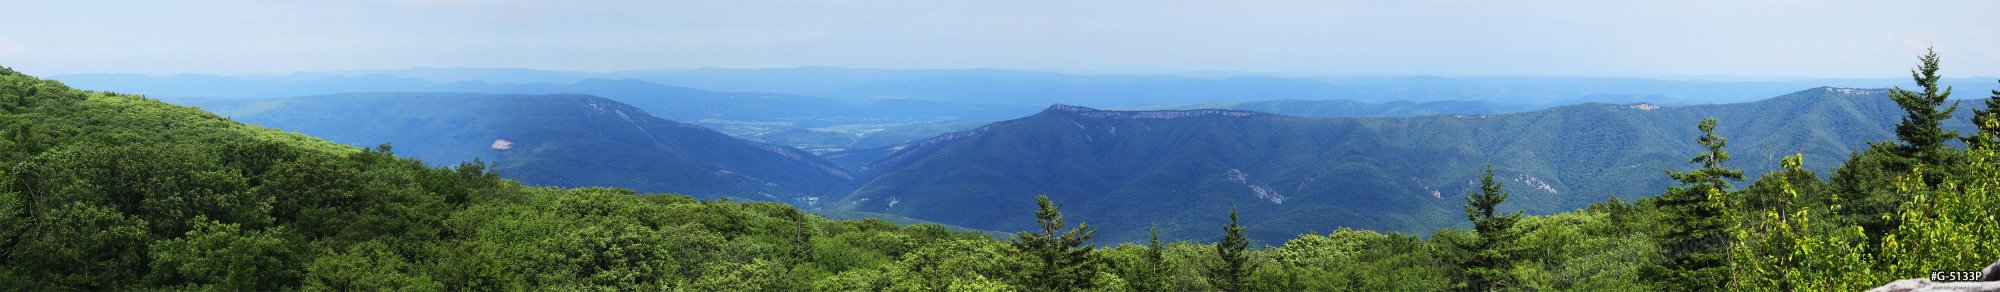 Dolly Sods, WV panorama